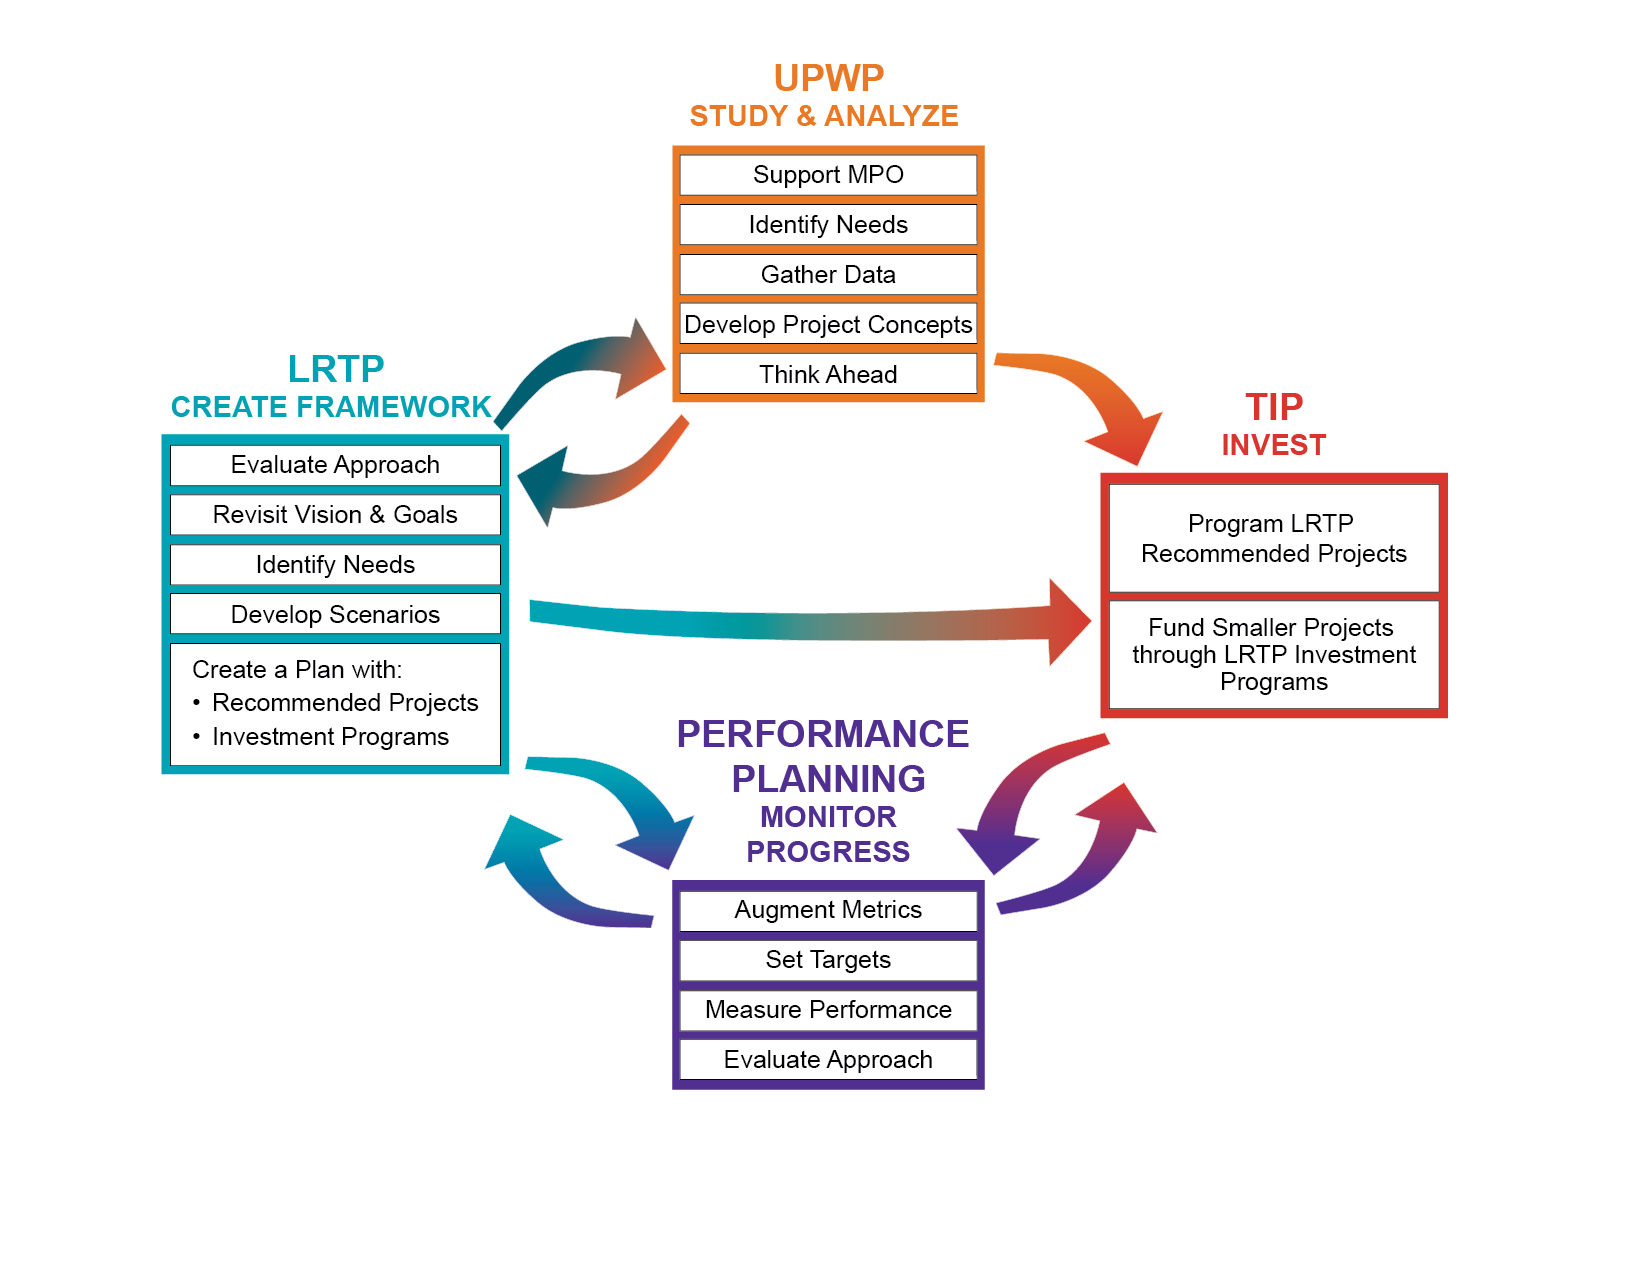 Figure 8-1 is a graphic displaying the relationships between the LRTP, UPWP, TIP, and Performance Planning and lists the main objectives of each plan. 